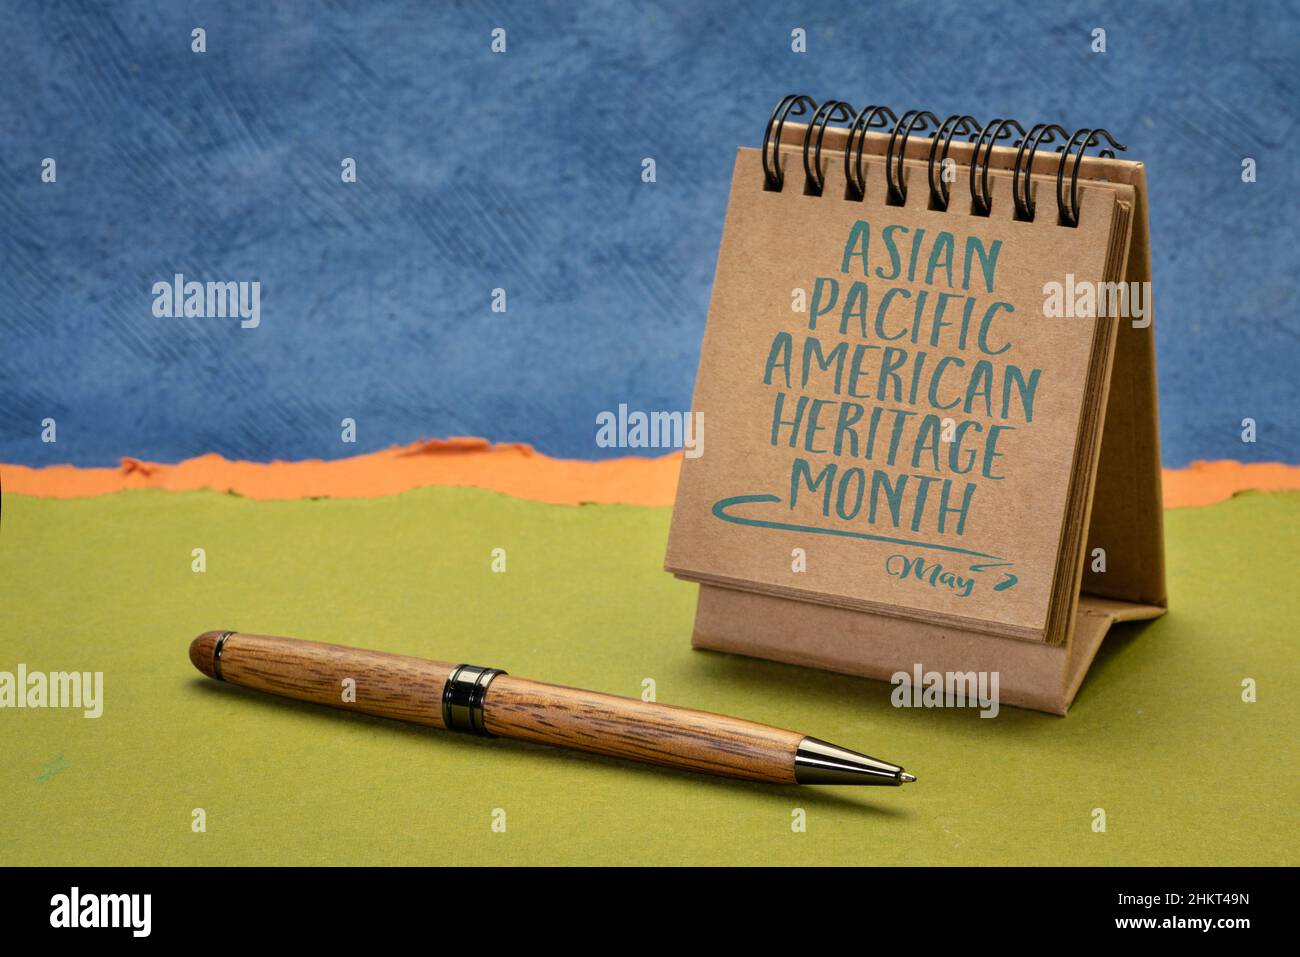 Asian Pacific American Heritage Month, May - handwriting in desktop calendar against abstract paper landscape, reminder of cultural event Stock Photo